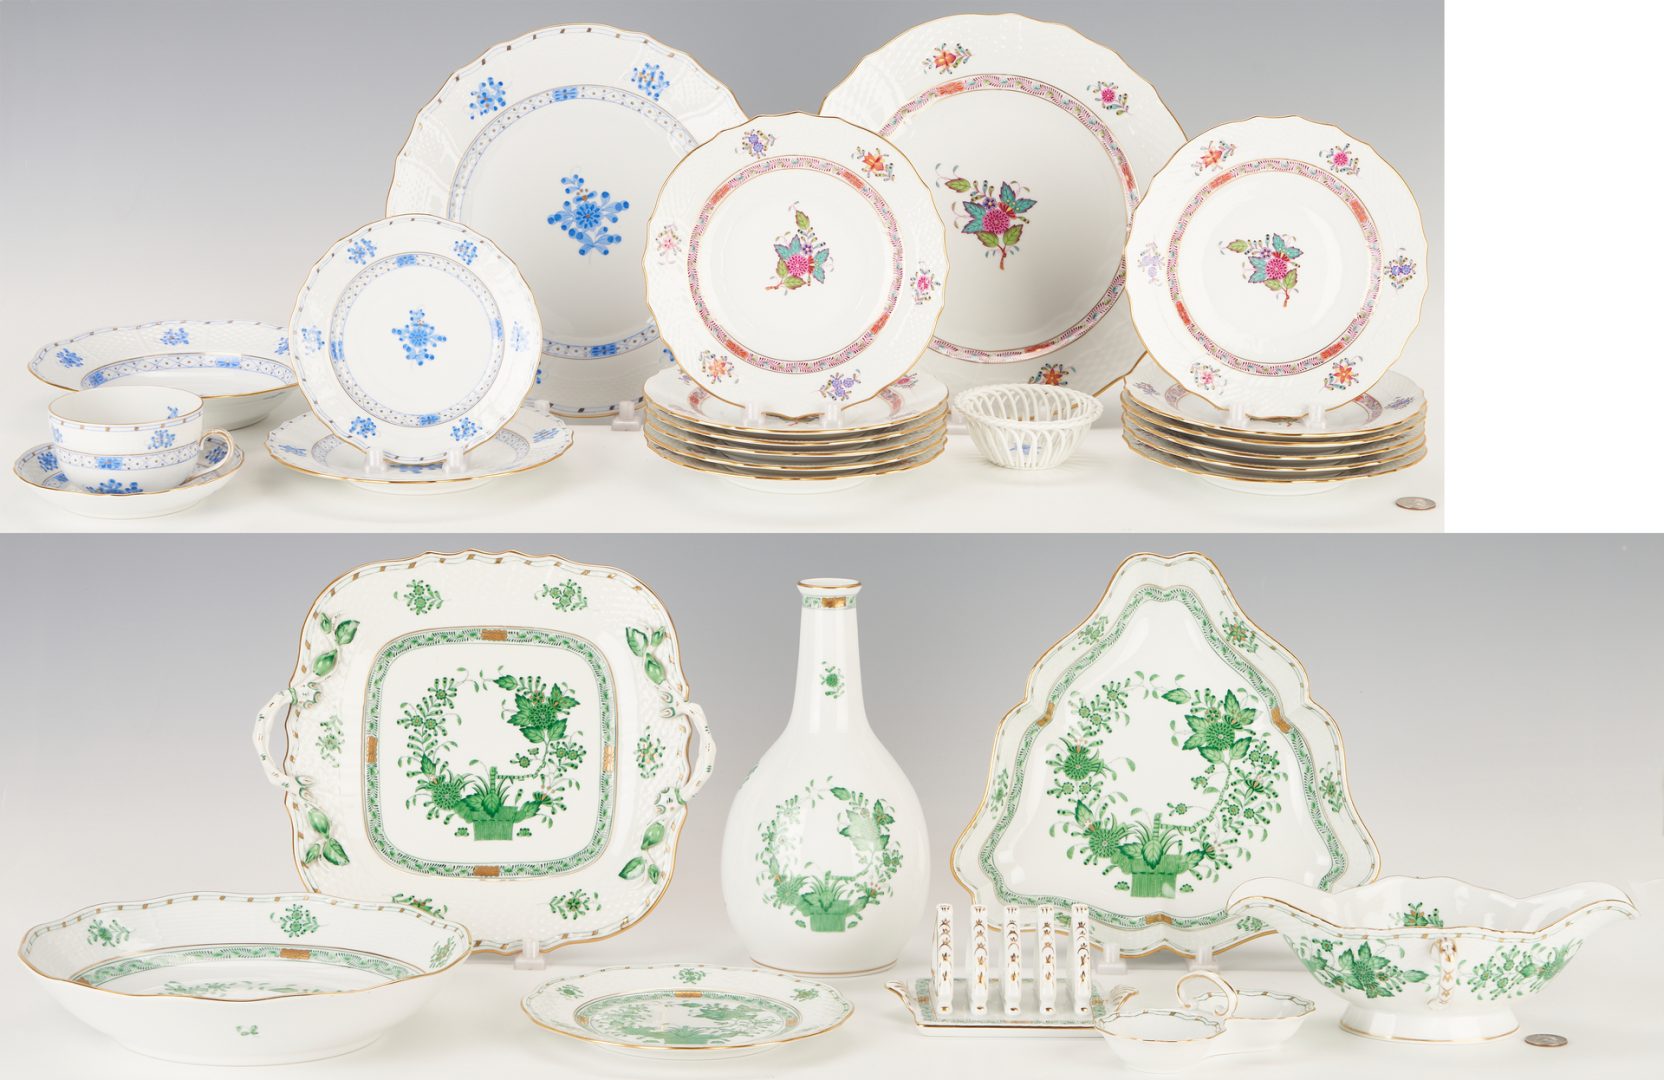 Lot 368: 28 Pcs. Herend Tableware, incl. Indian Basket, Waldstein, & Chinese Bouquet Multi